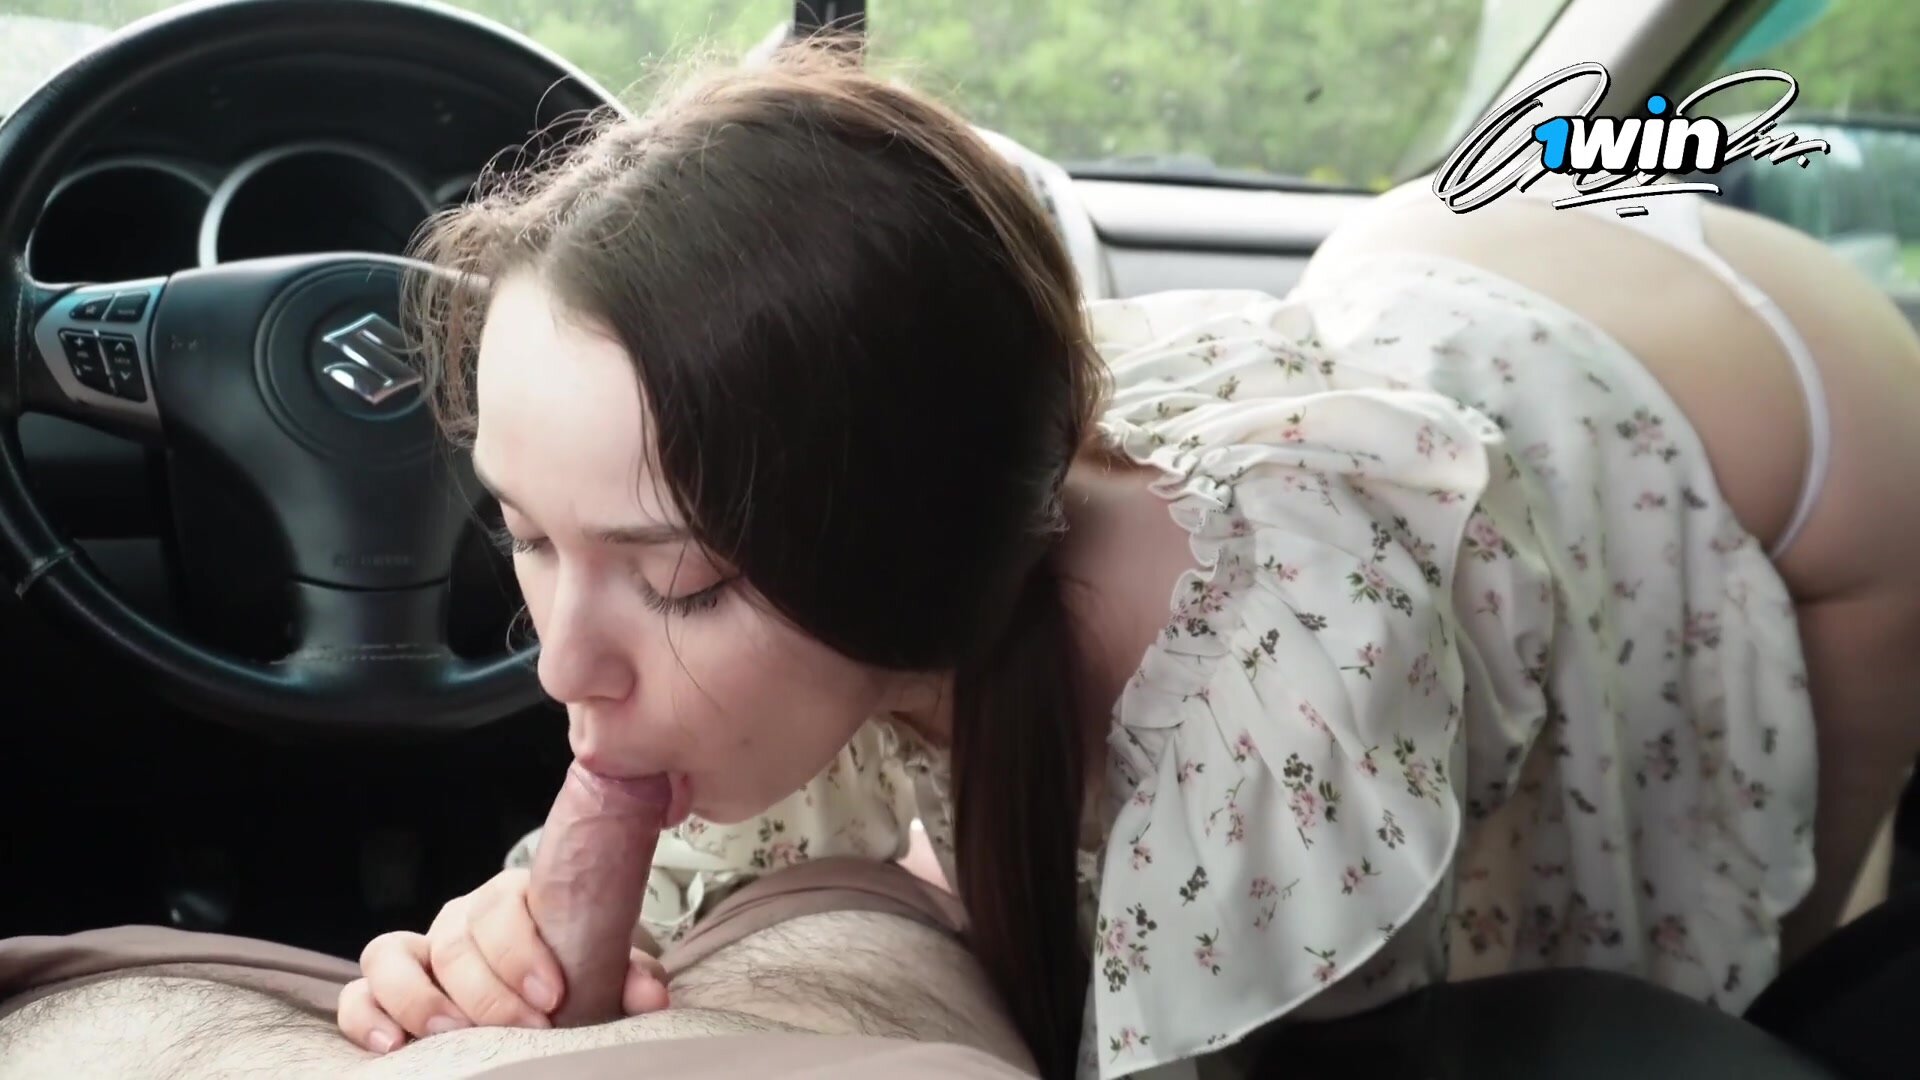 Deluxe_Bitch 2 - Stepsister paid with a blowjob for a ride. Fucked in the car